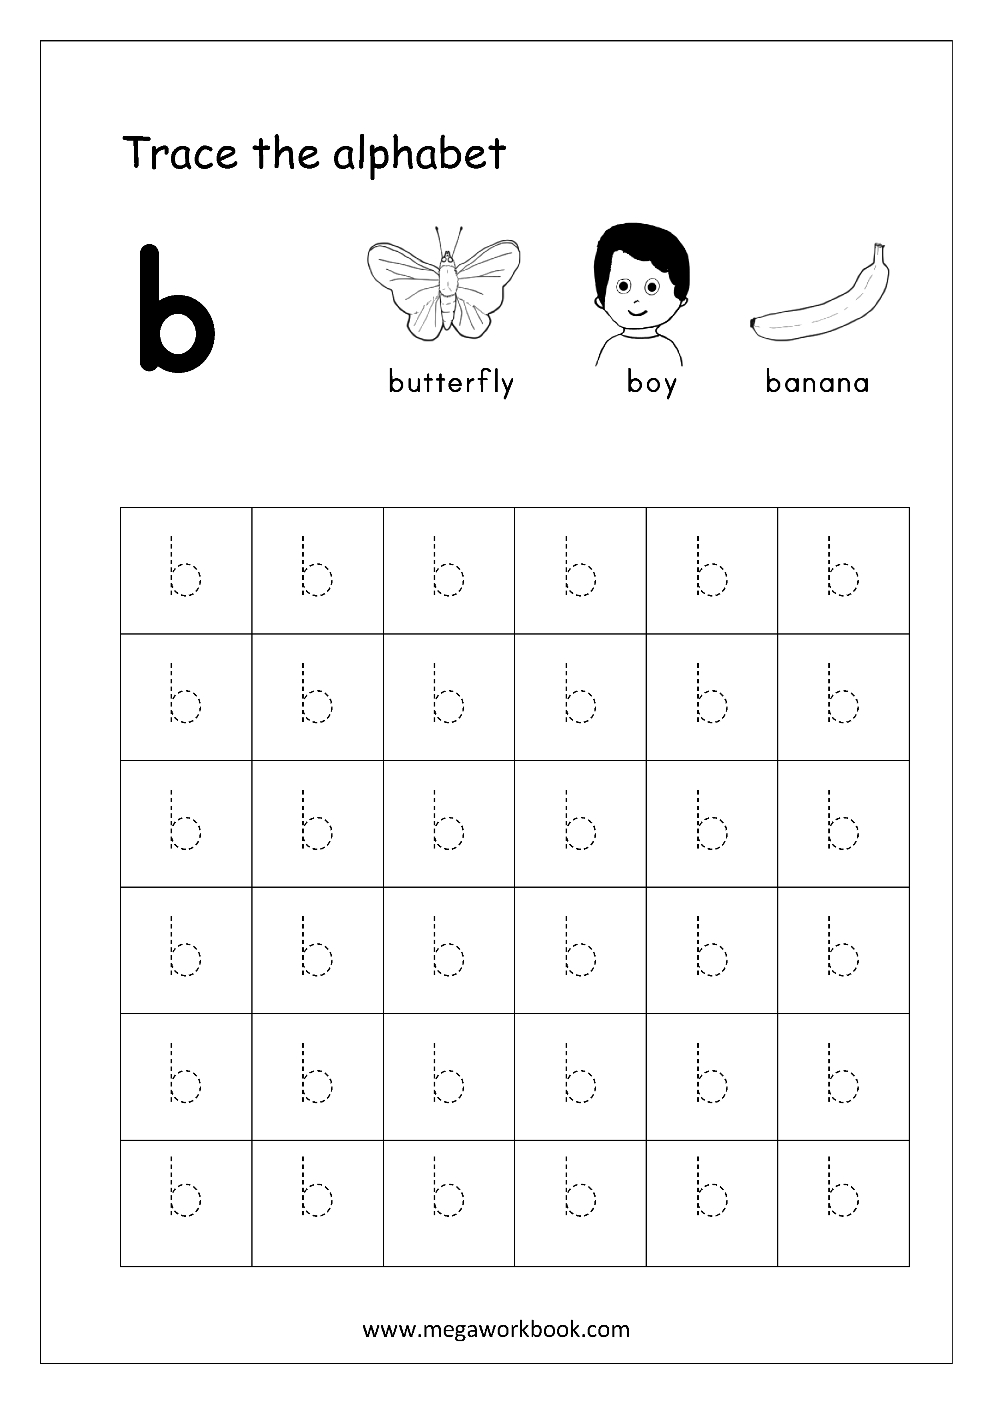 Junior Kg Alphabet Worksheets Jr Kids Tracing Small with regard to Tracing Small Letters Worksheets